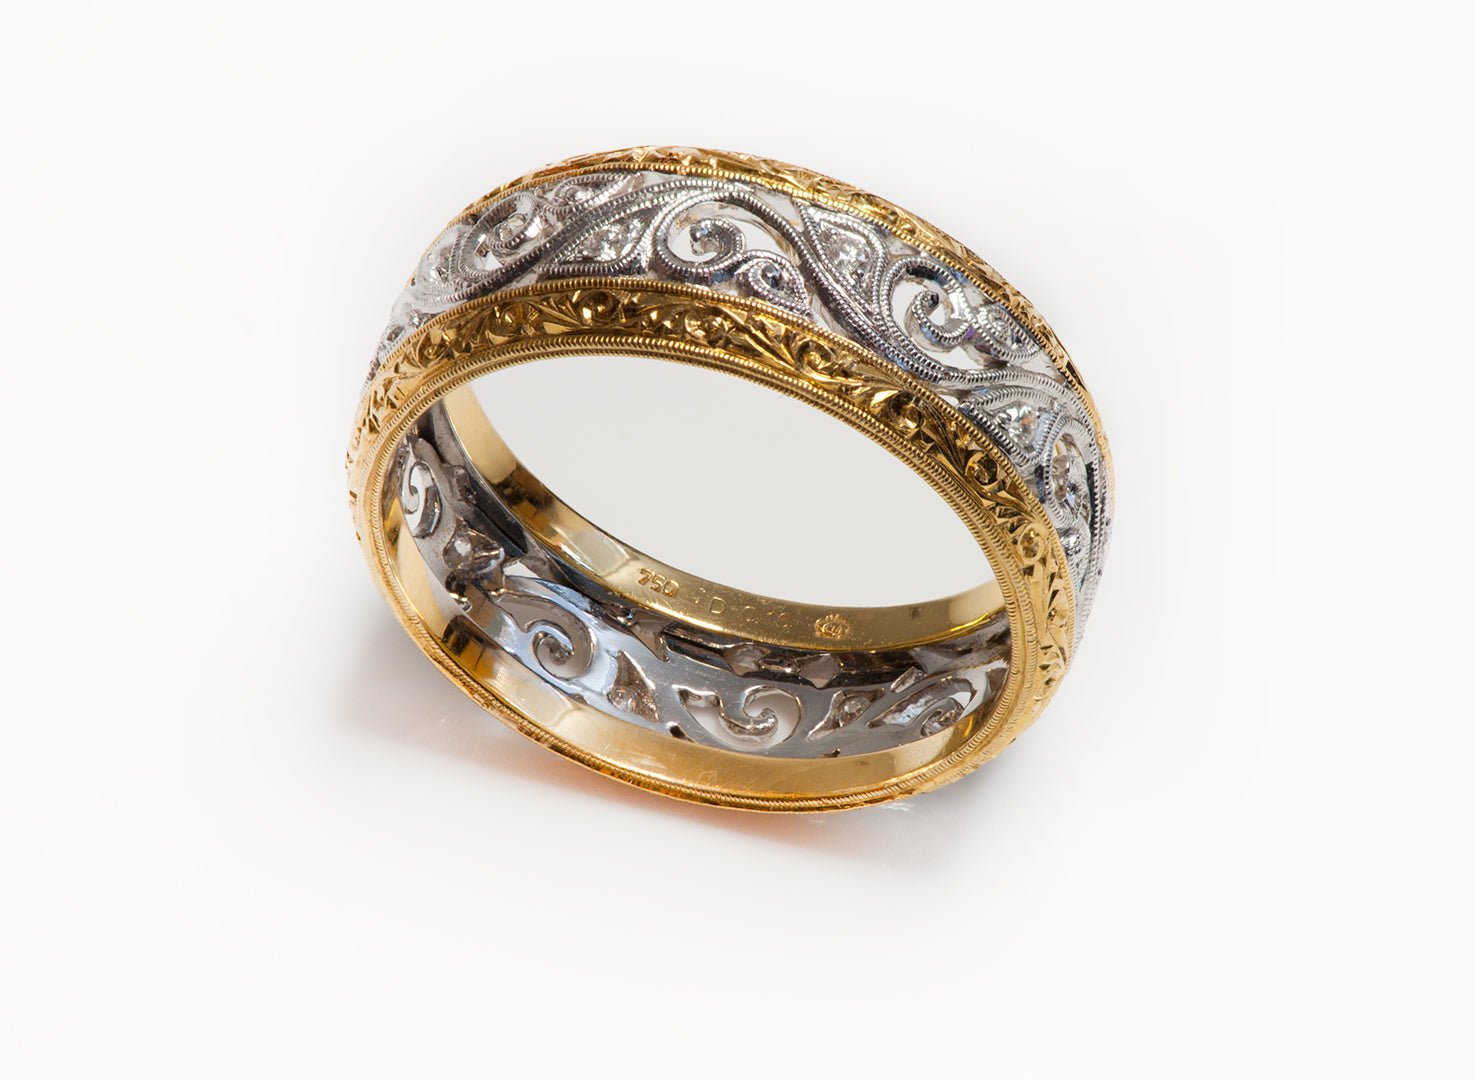 Where To Buy The Perfect Vintage Antique Ring - DSF Antique Jewelry